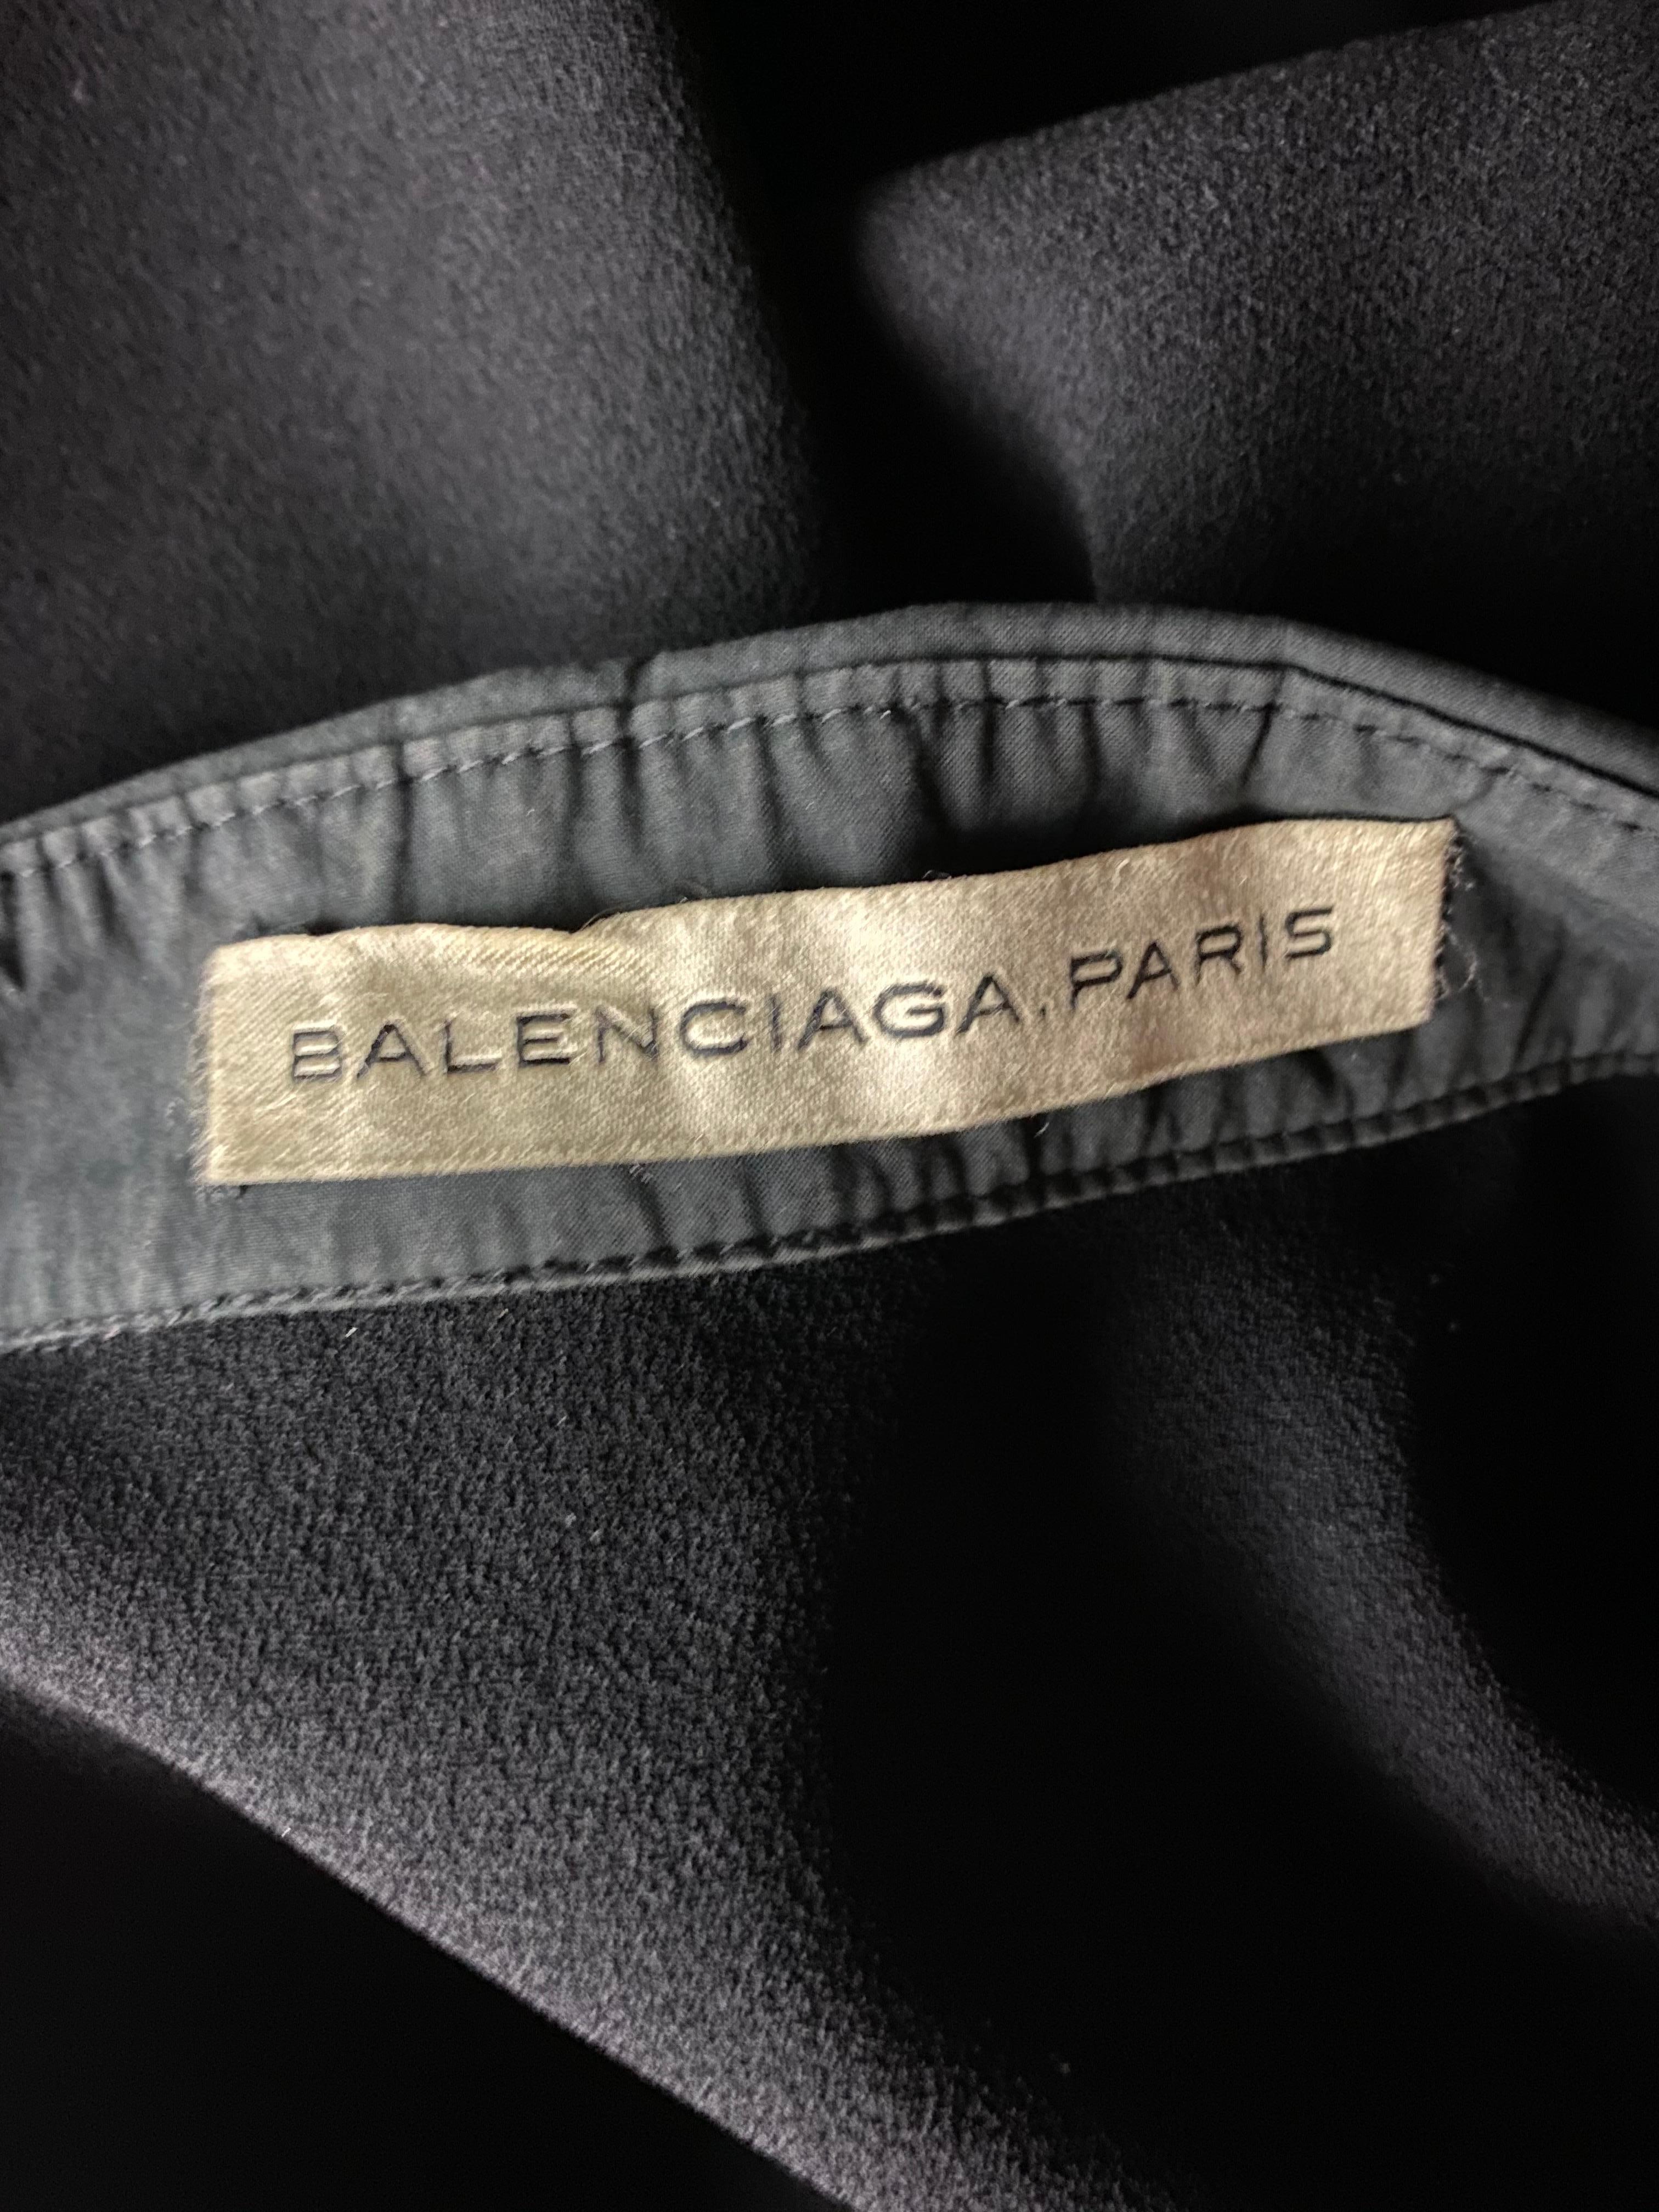 Balenciaga Paris Black Sleeveless Top Blouse, Size 38 In Excellent Condition For Sale In Beverly Hills, CA